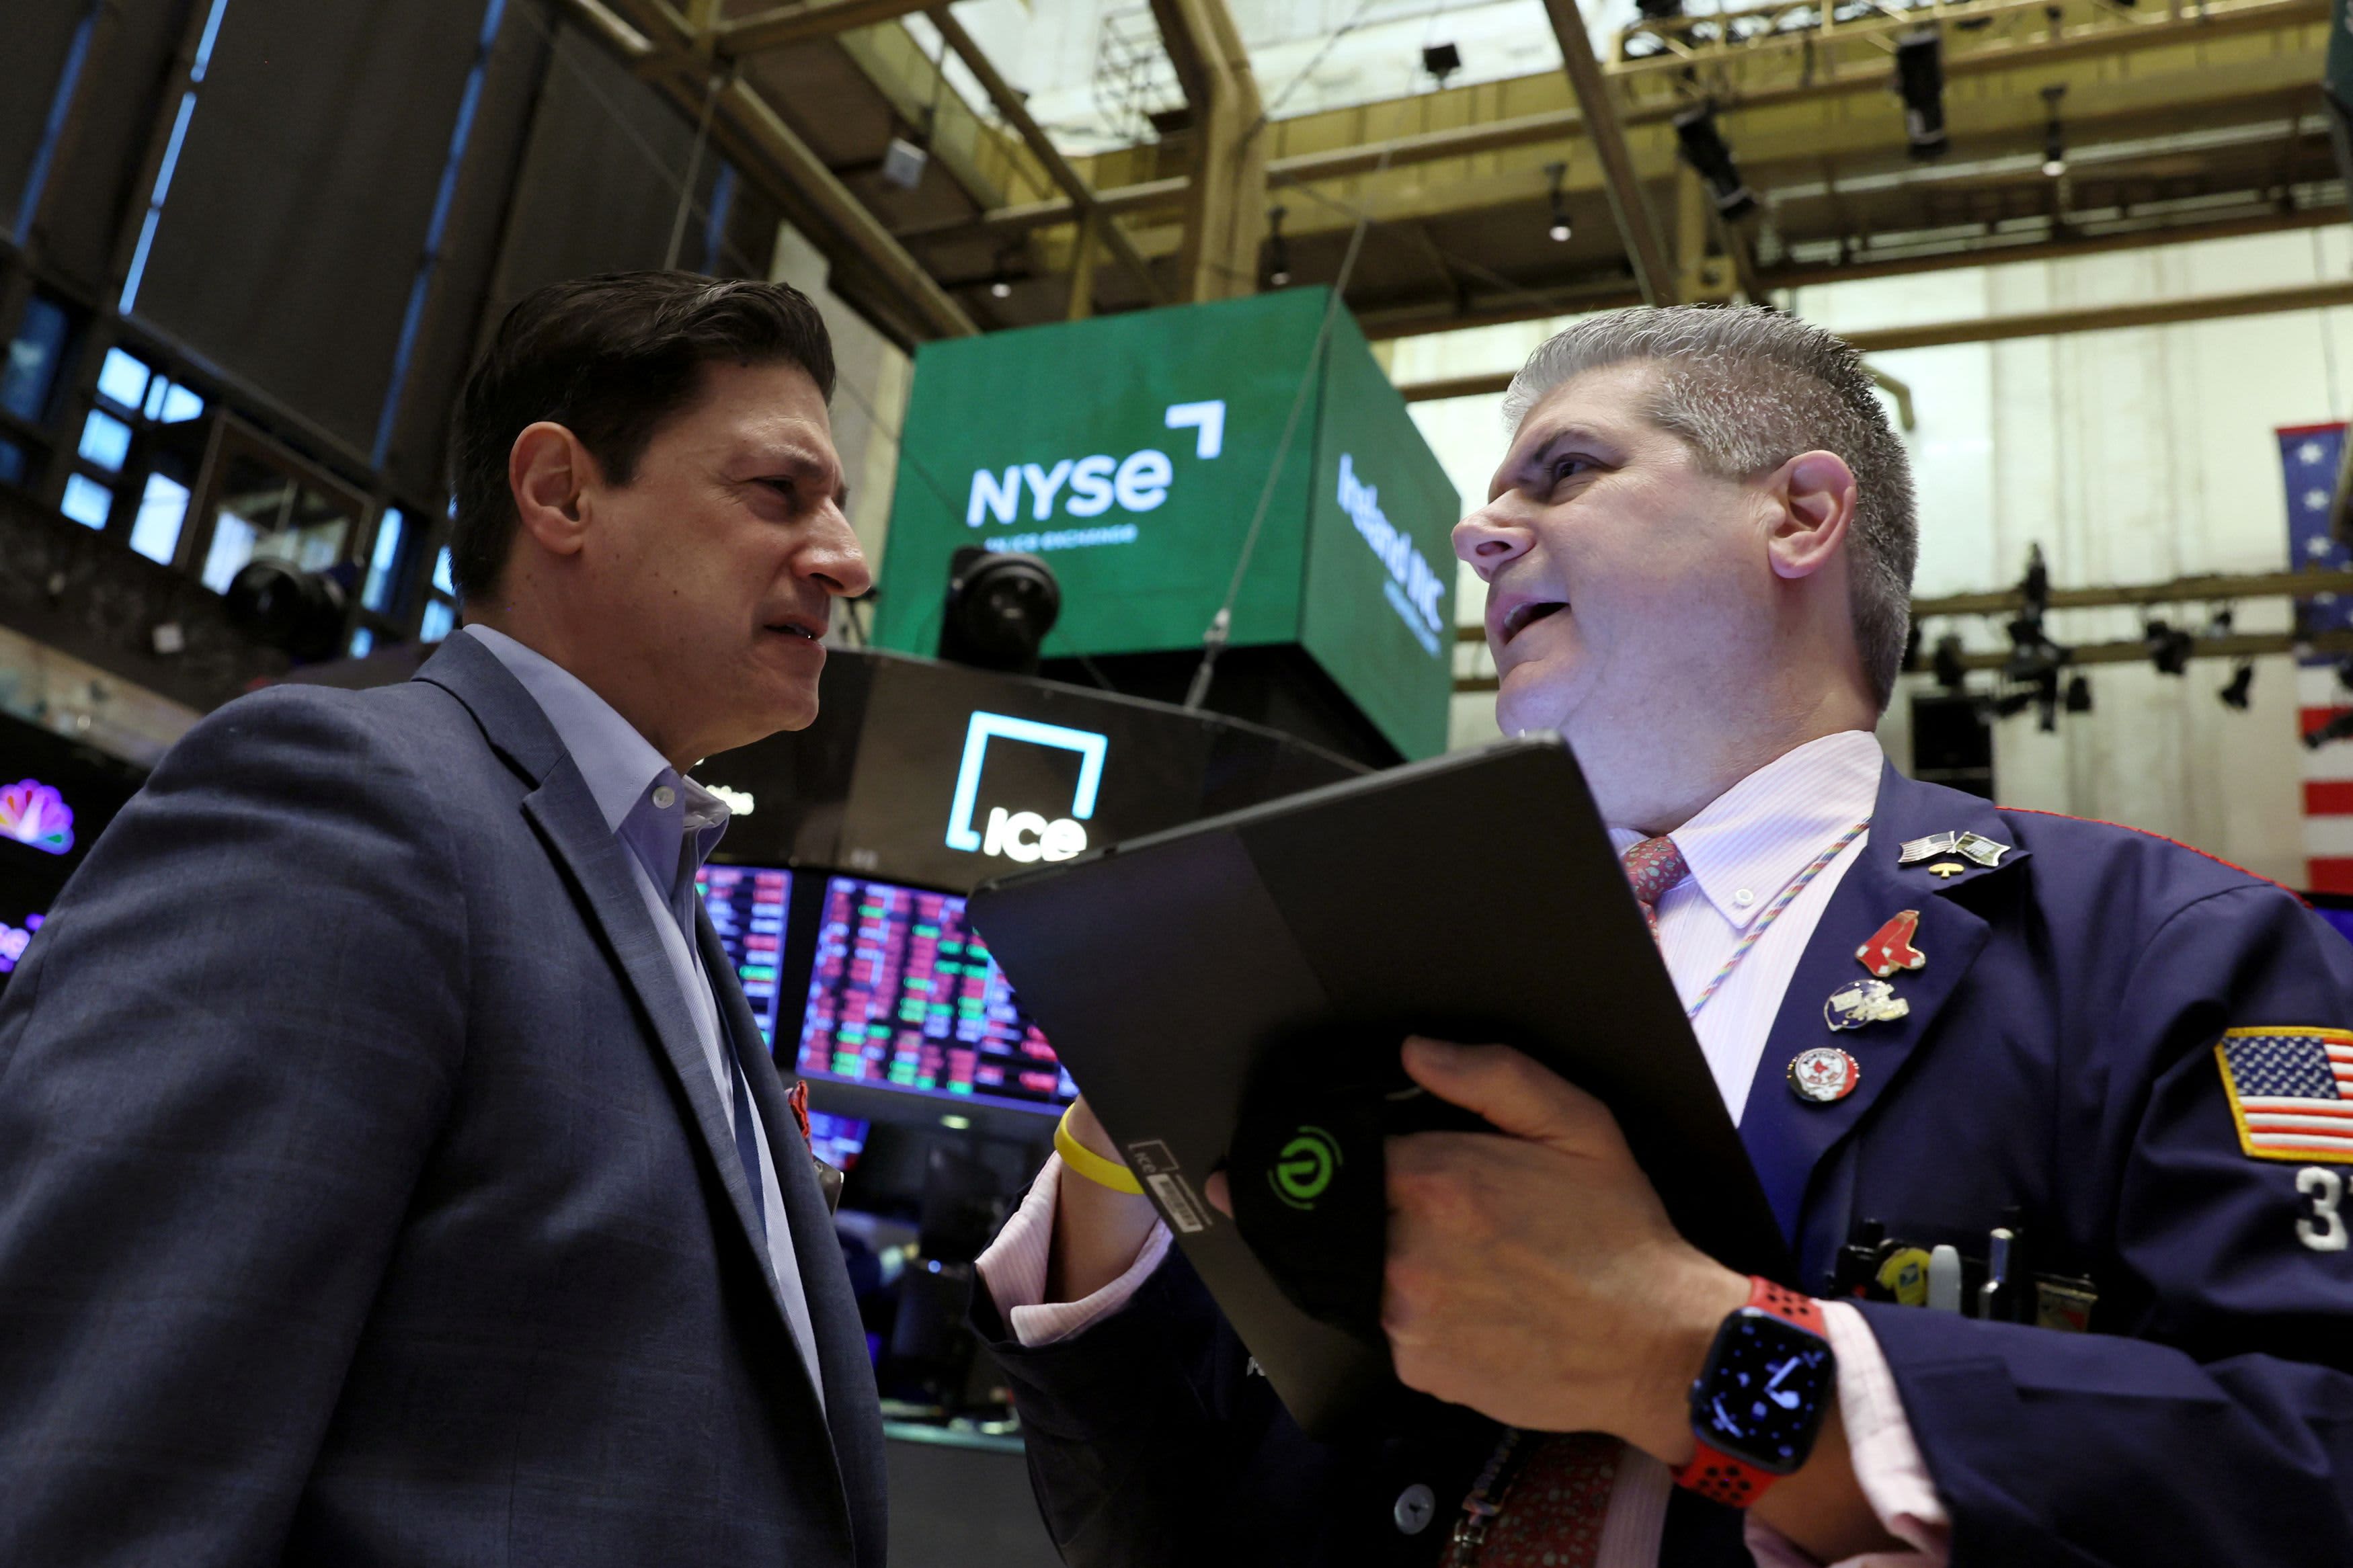 Tech shares were the hot play this week but investors should beware the Fed